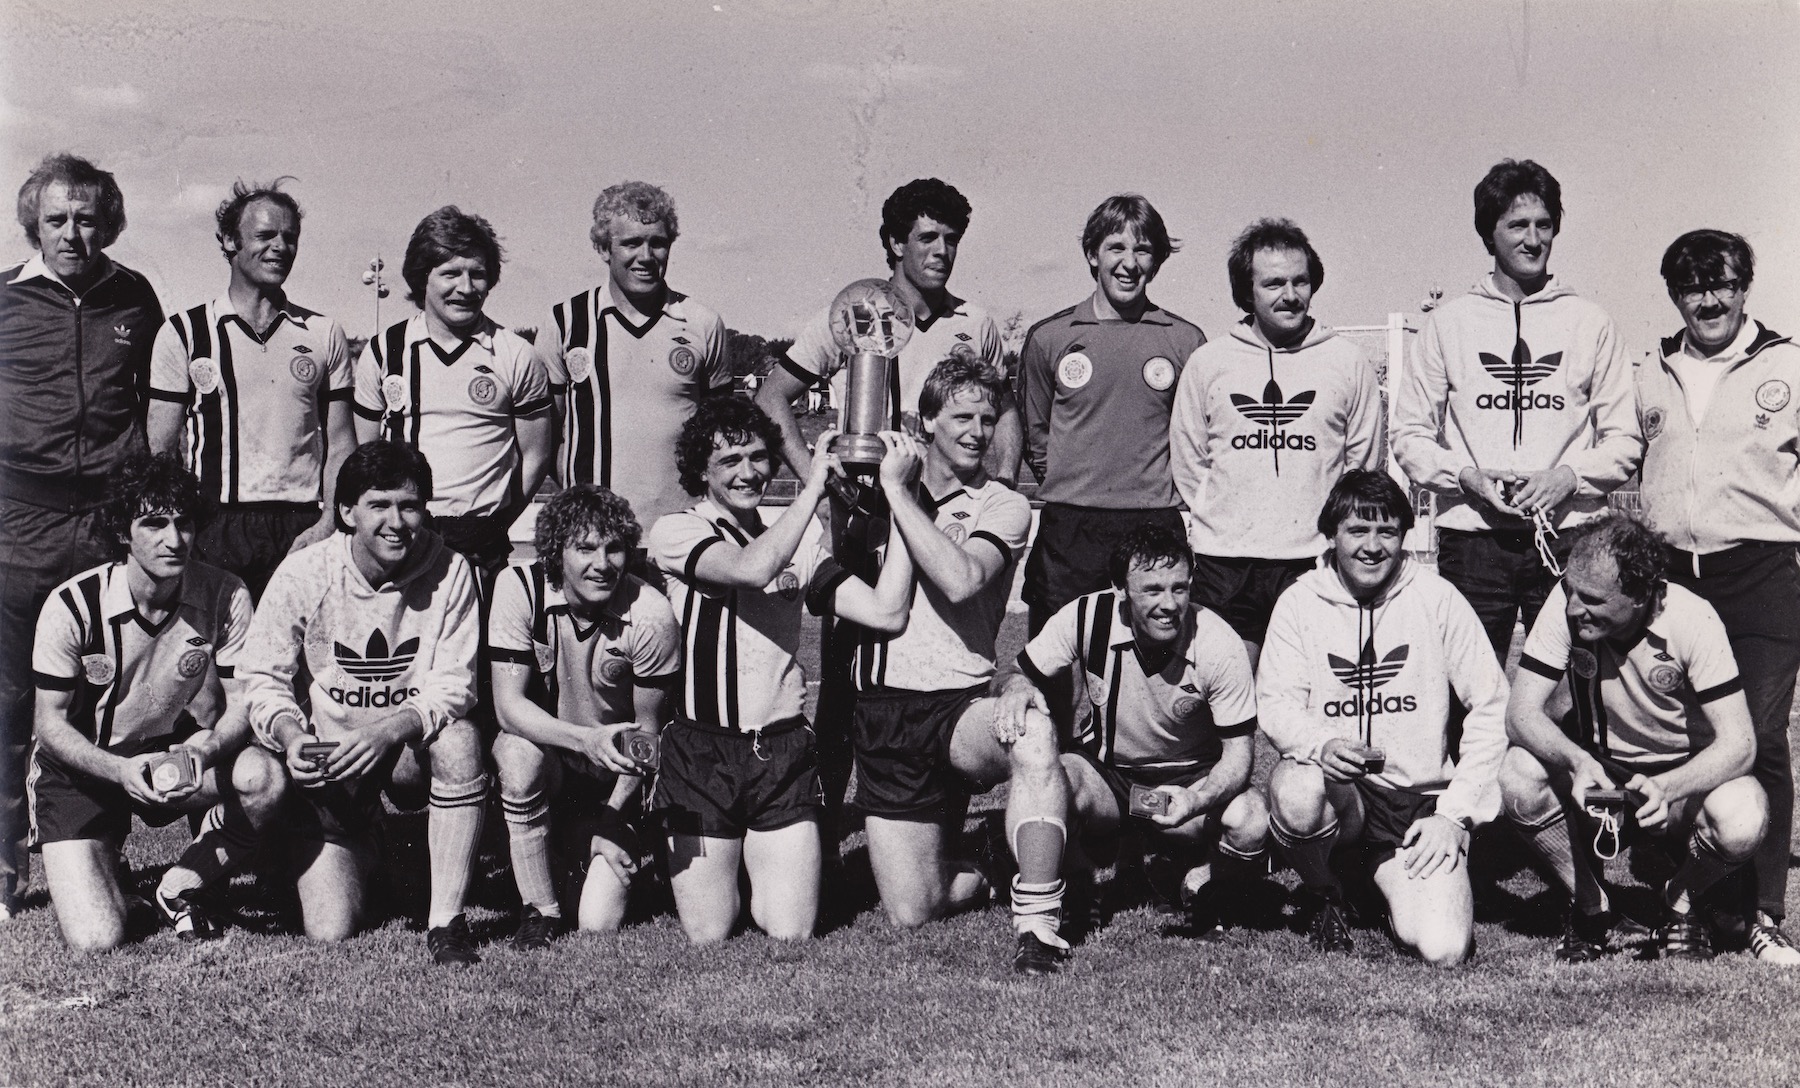 McKendry and the victorious Top 4 winning Heidelberg team of 1980.